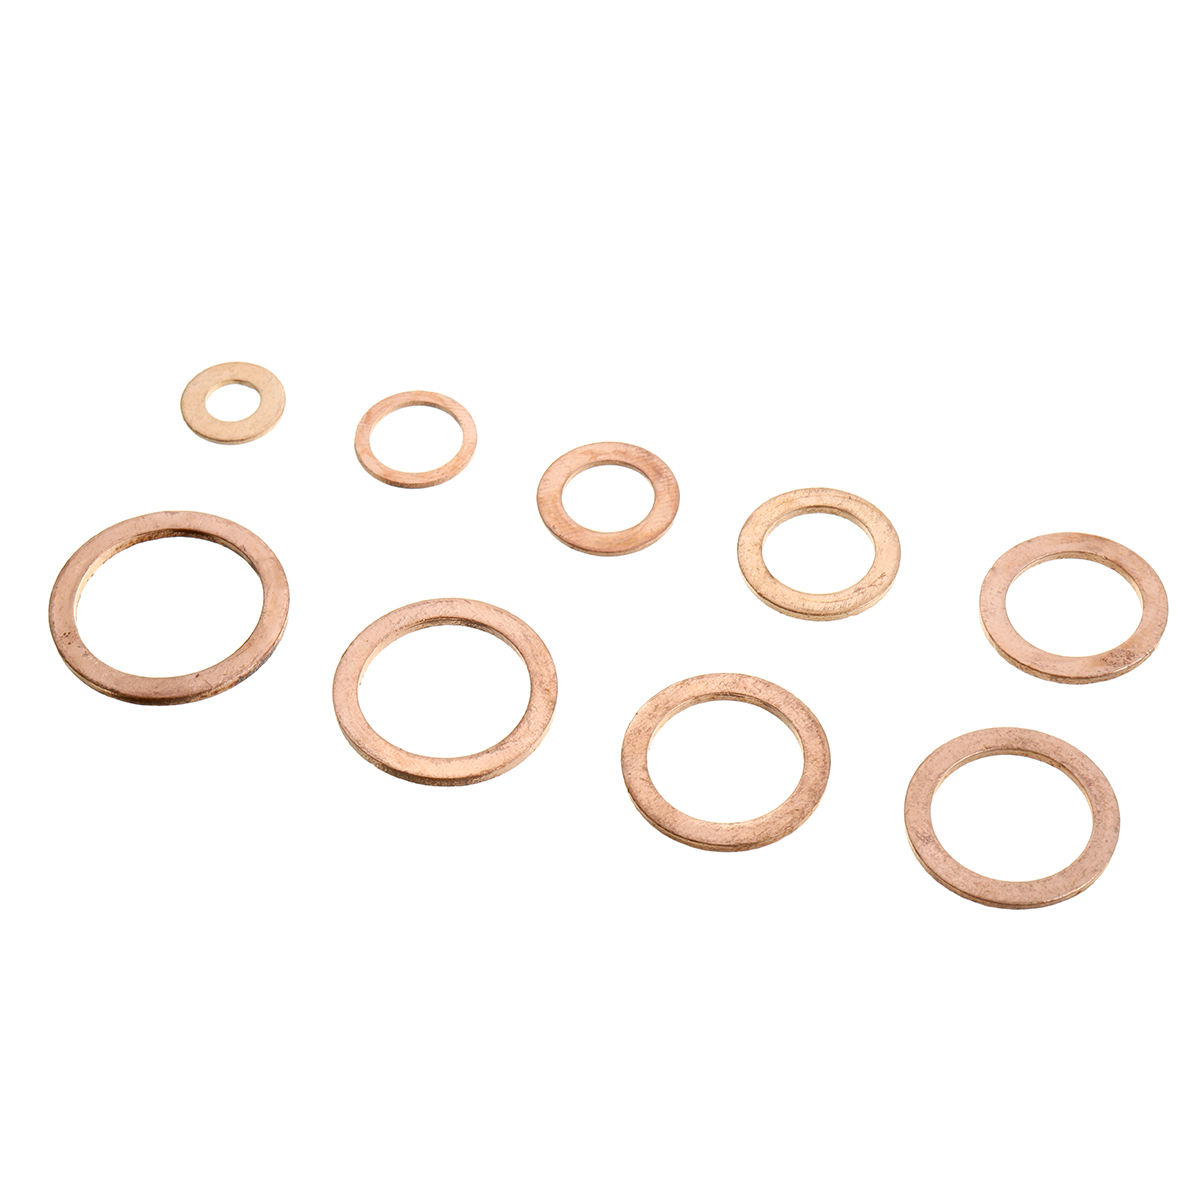 100Pcs-Assorted-Copper-Sealing-Solid-Gasket-Washer-Sump-Plug-Oil-For-Boat-Crush-Flat-Seal-Ring-Tool--1809755-8